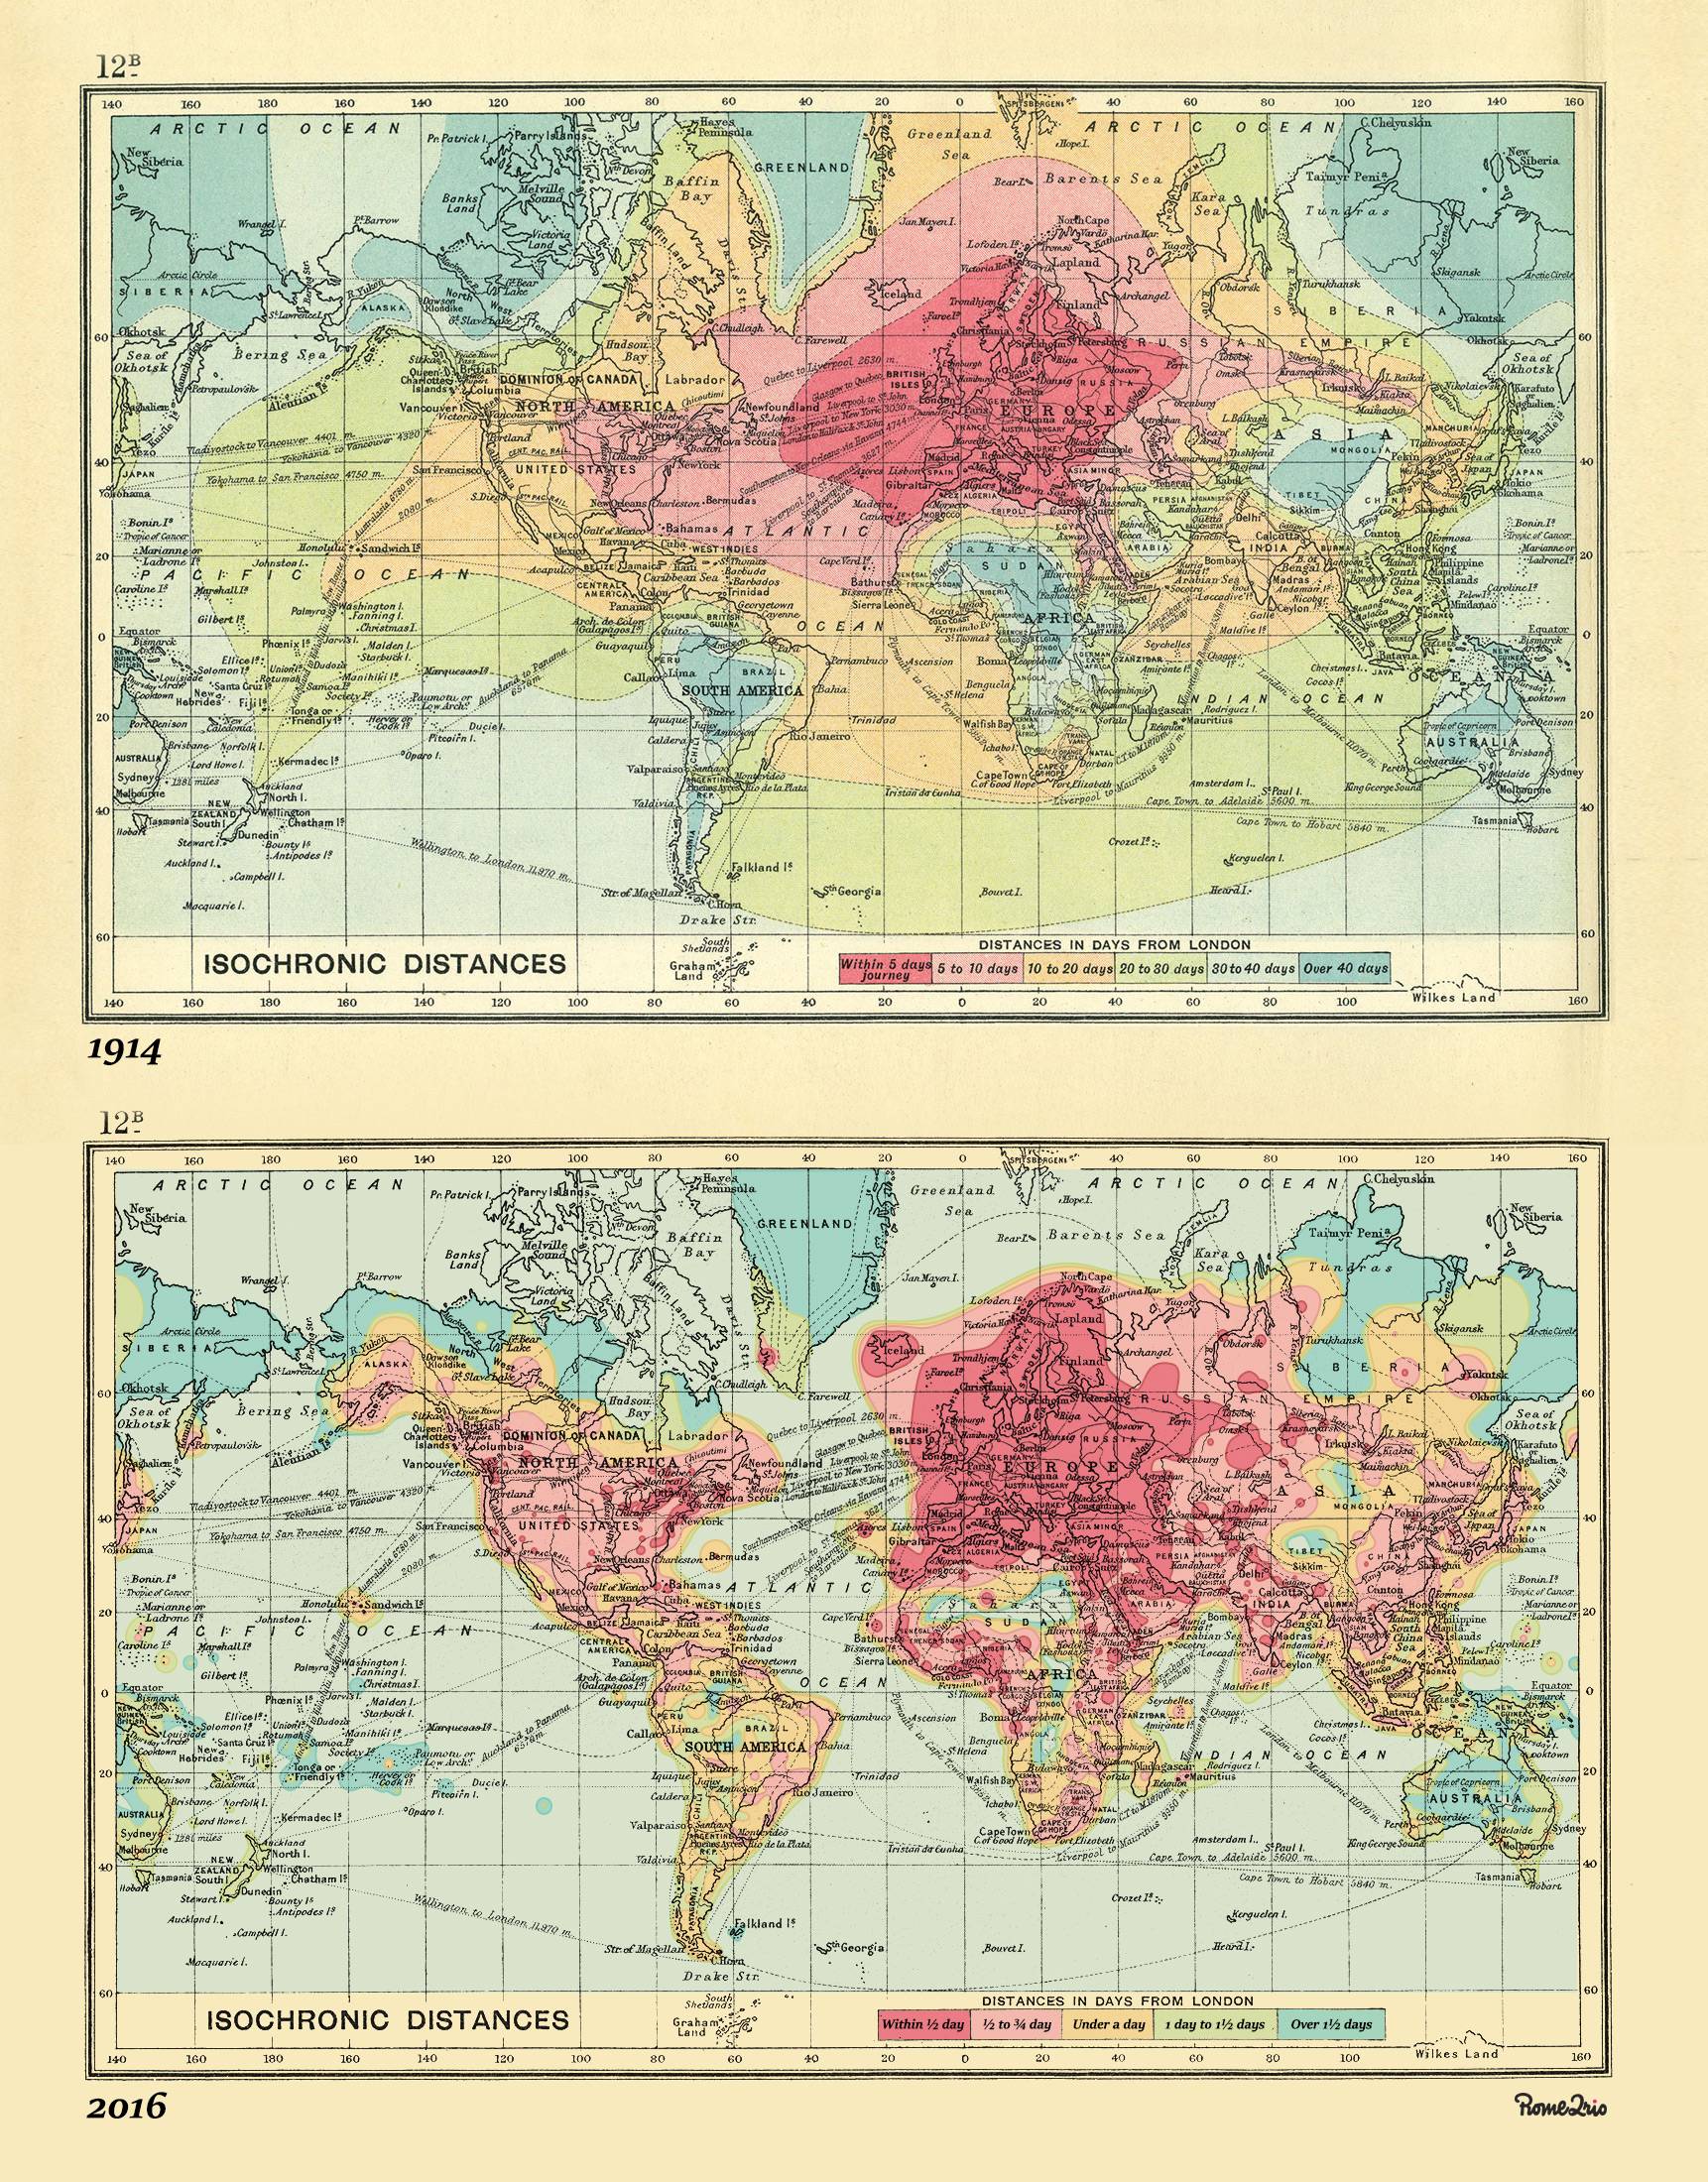 Isochronic map of world travel from London in 1914 and 2016.